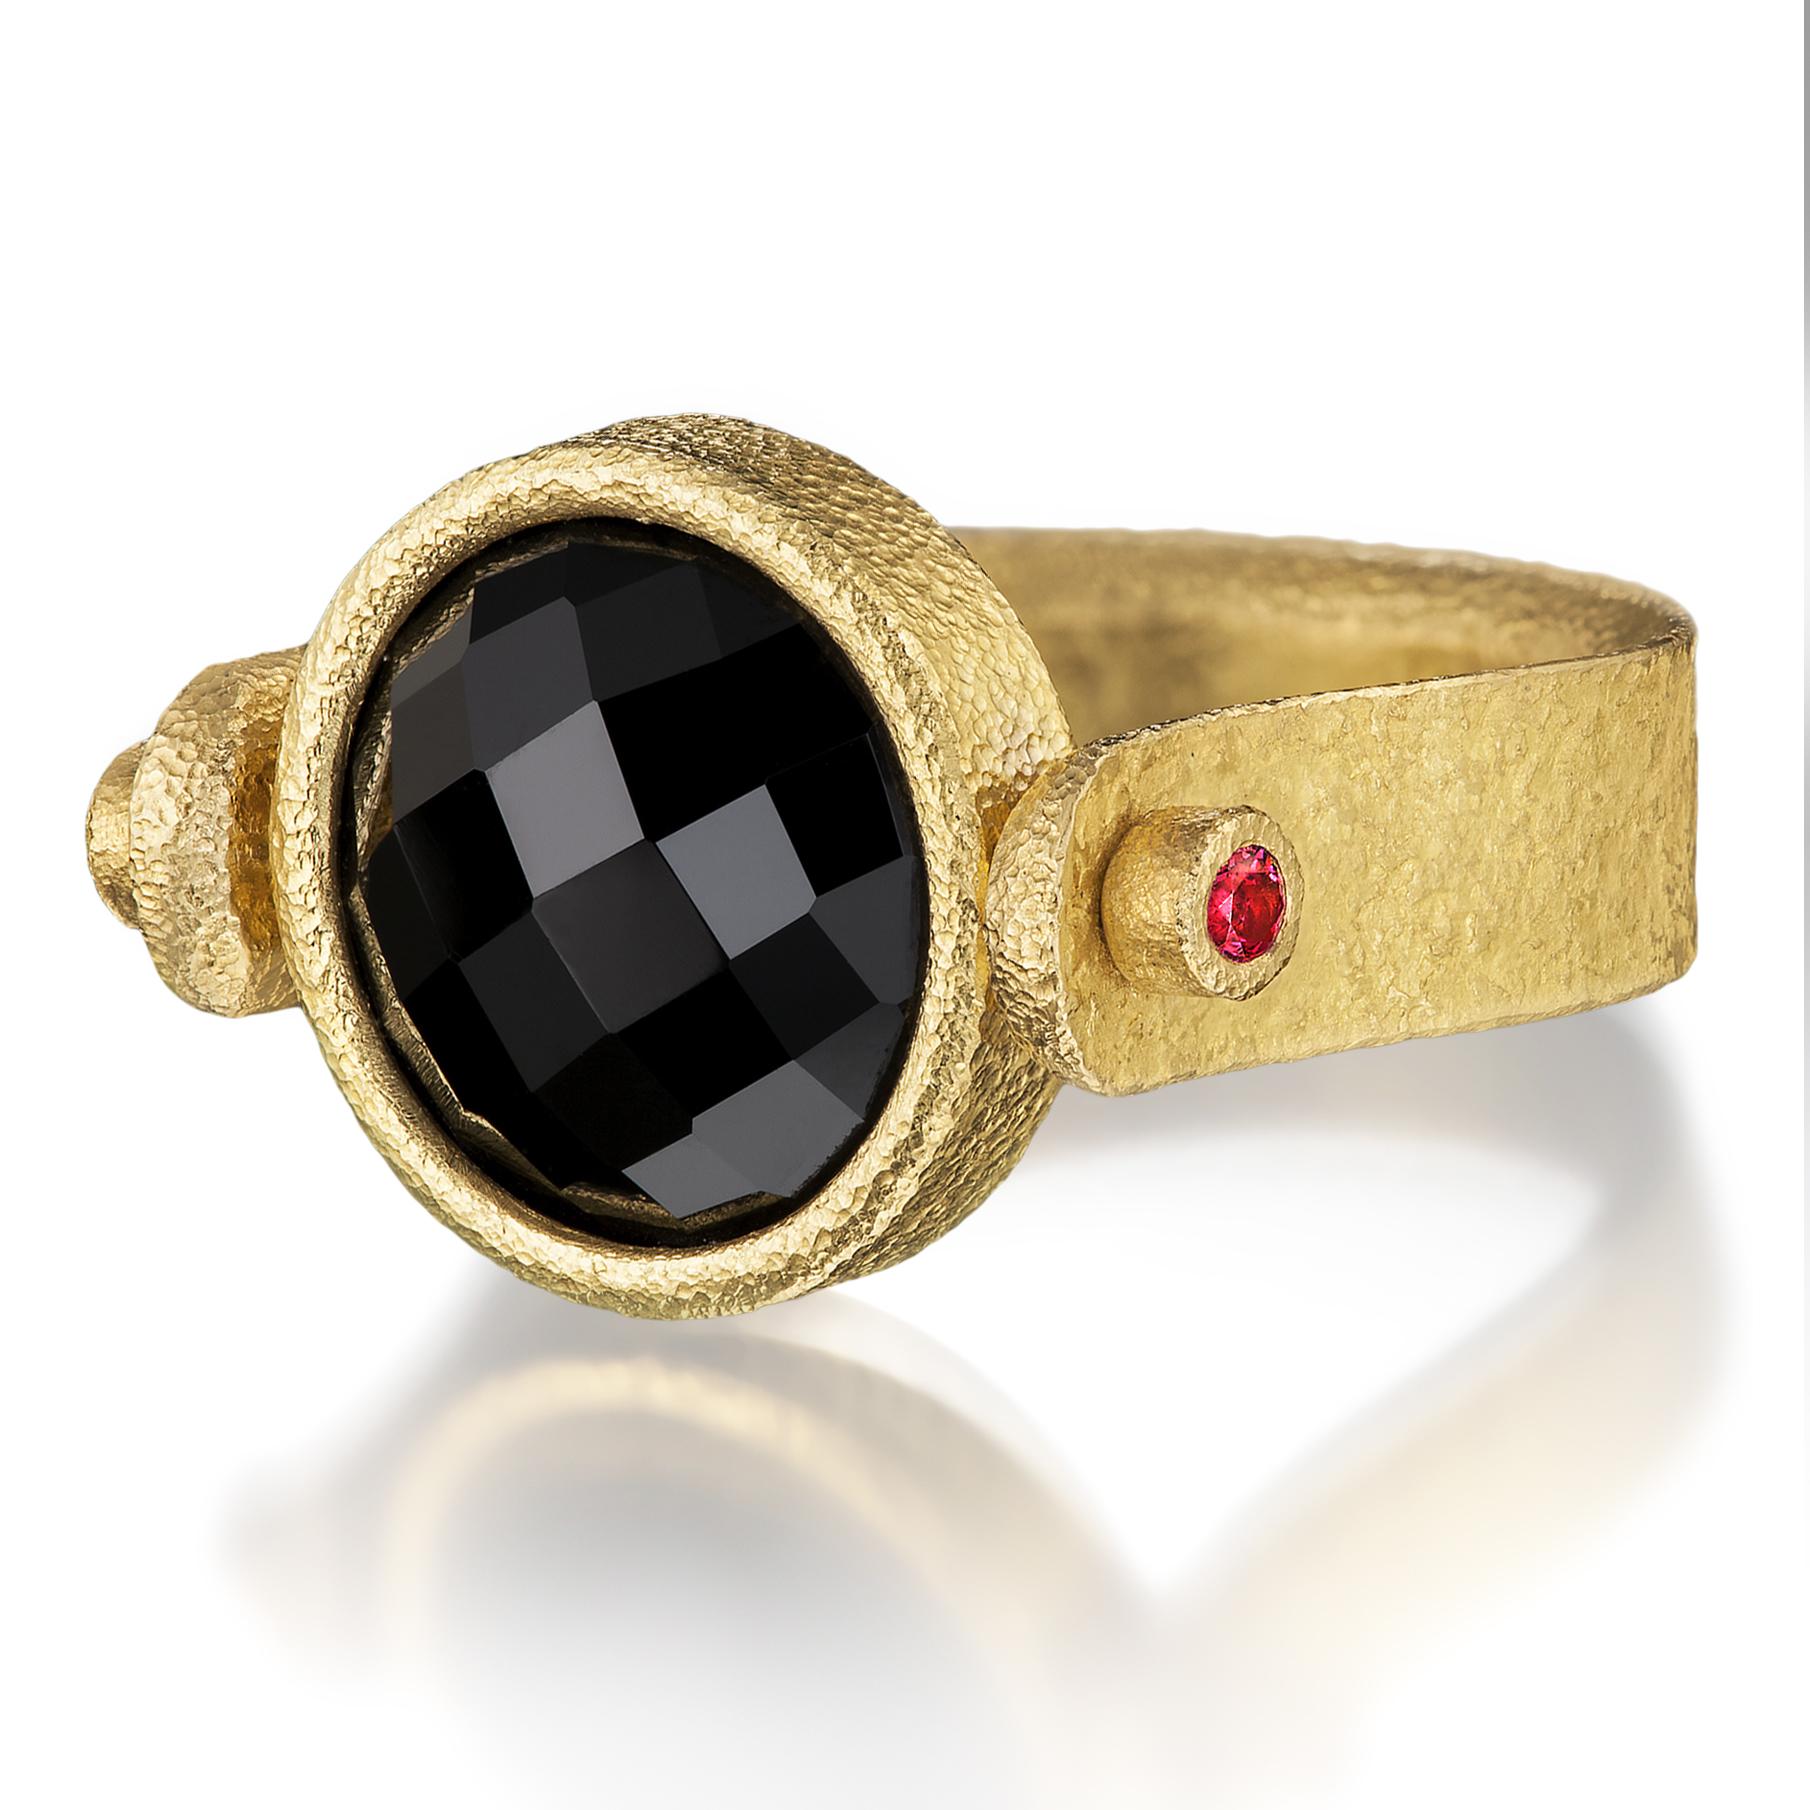 One of a Kind Flip Ring by renowned jewelry maker Devta Doolan featuring a beautiful, faceted checker-cut black spinel wrapped in Devta's luxurious signature-finished 22k yellow gold, and attached to 360 degree rotating rods bezel-set with a